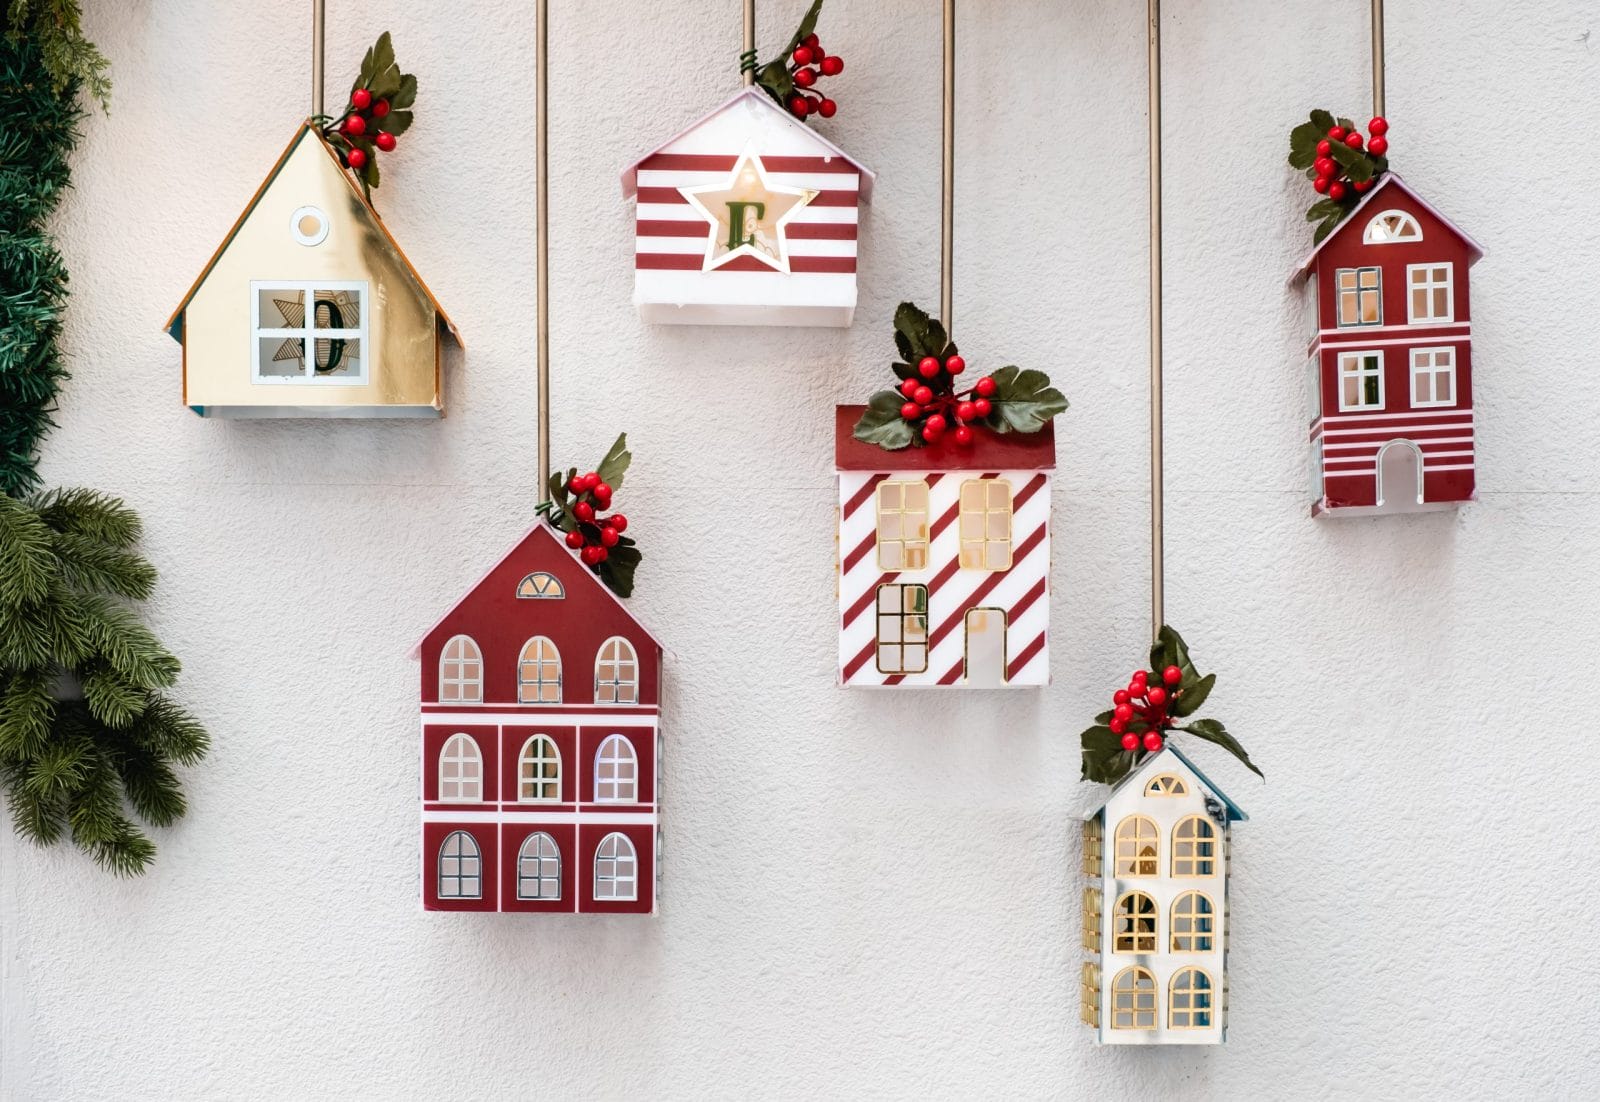 Christmas Ornaments of homes hanging